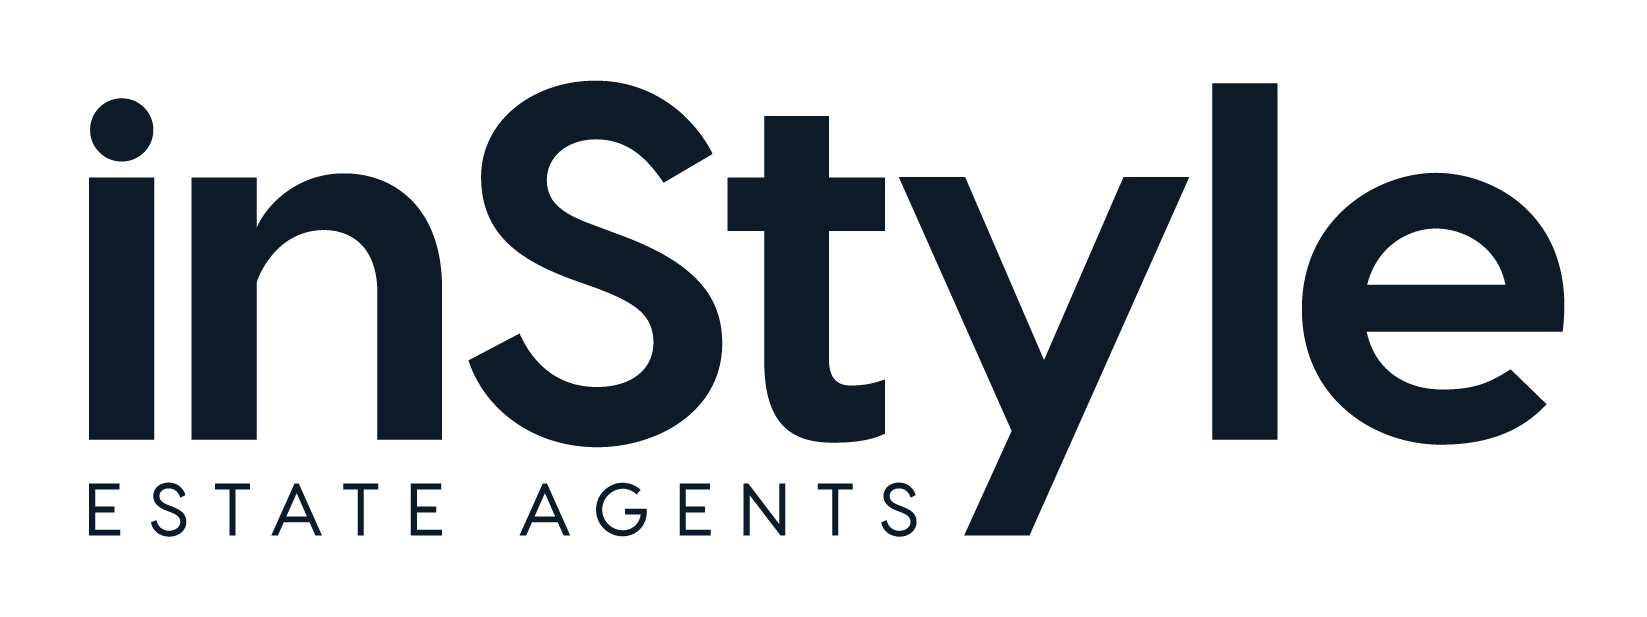 Instyle Estate Agents Canberra - Real Estate Agency